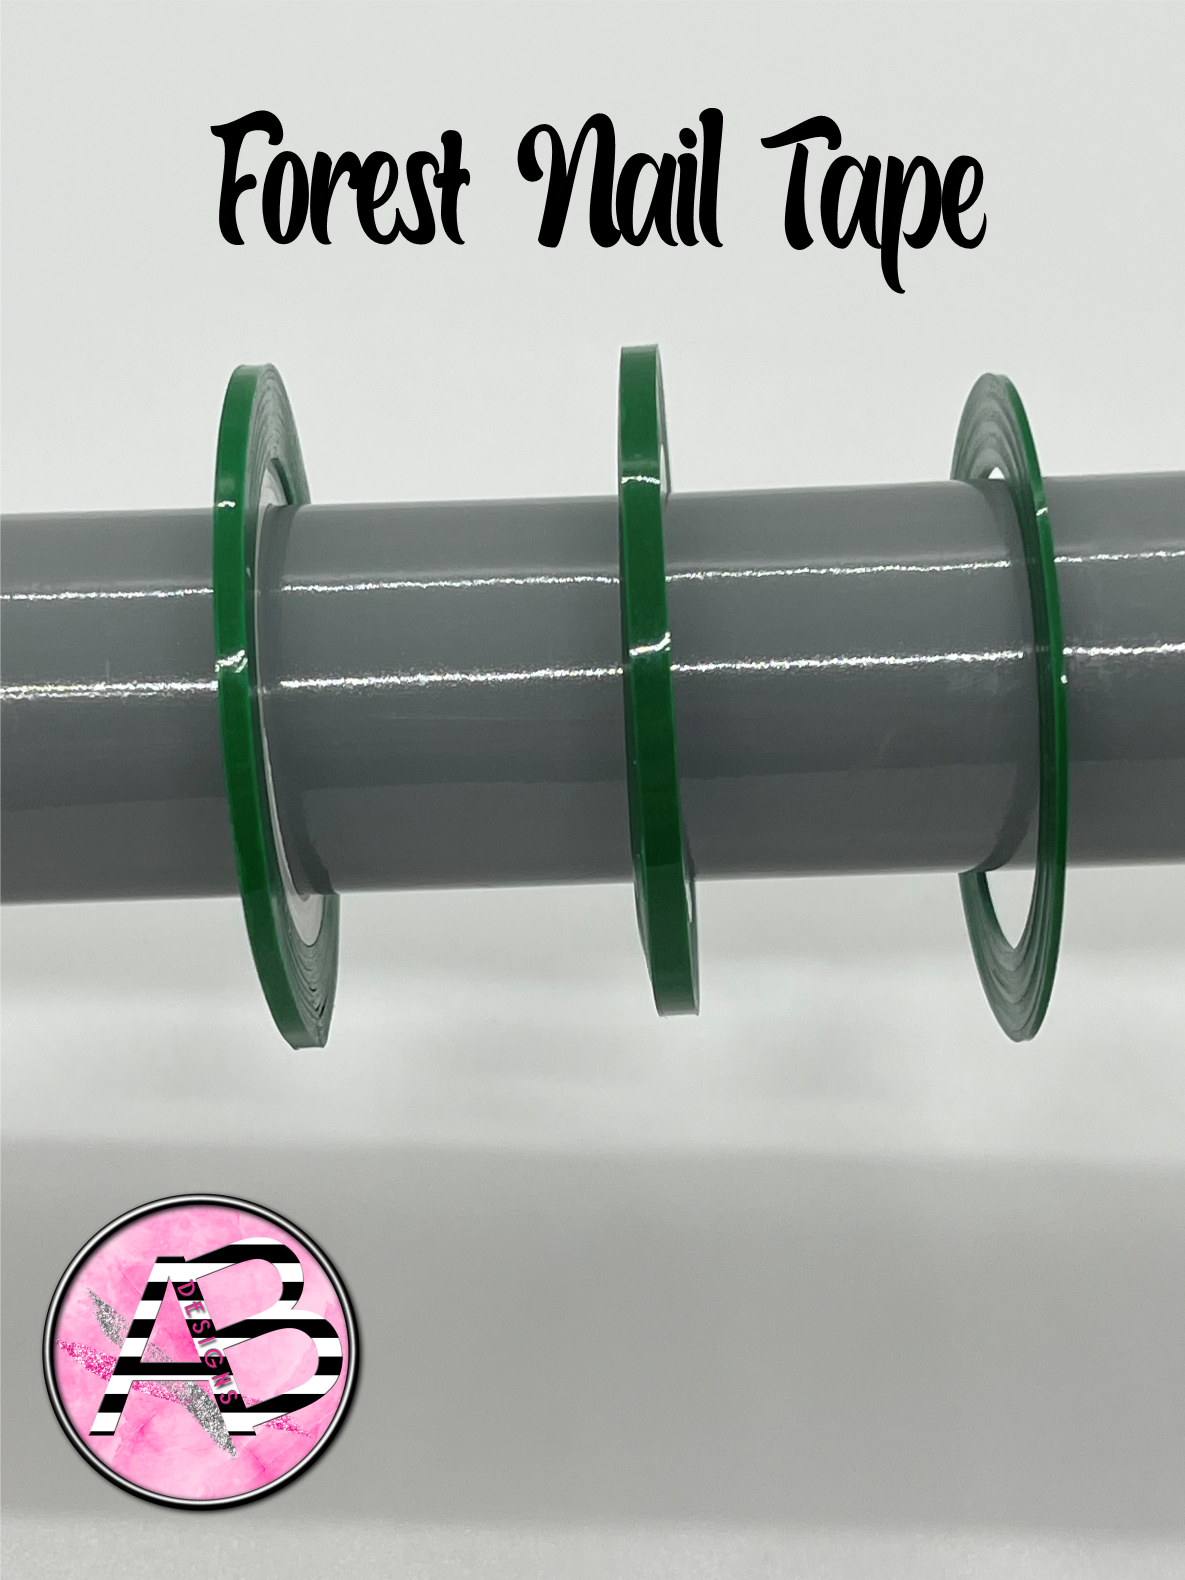 Forest Nail Tape - Striping Tape